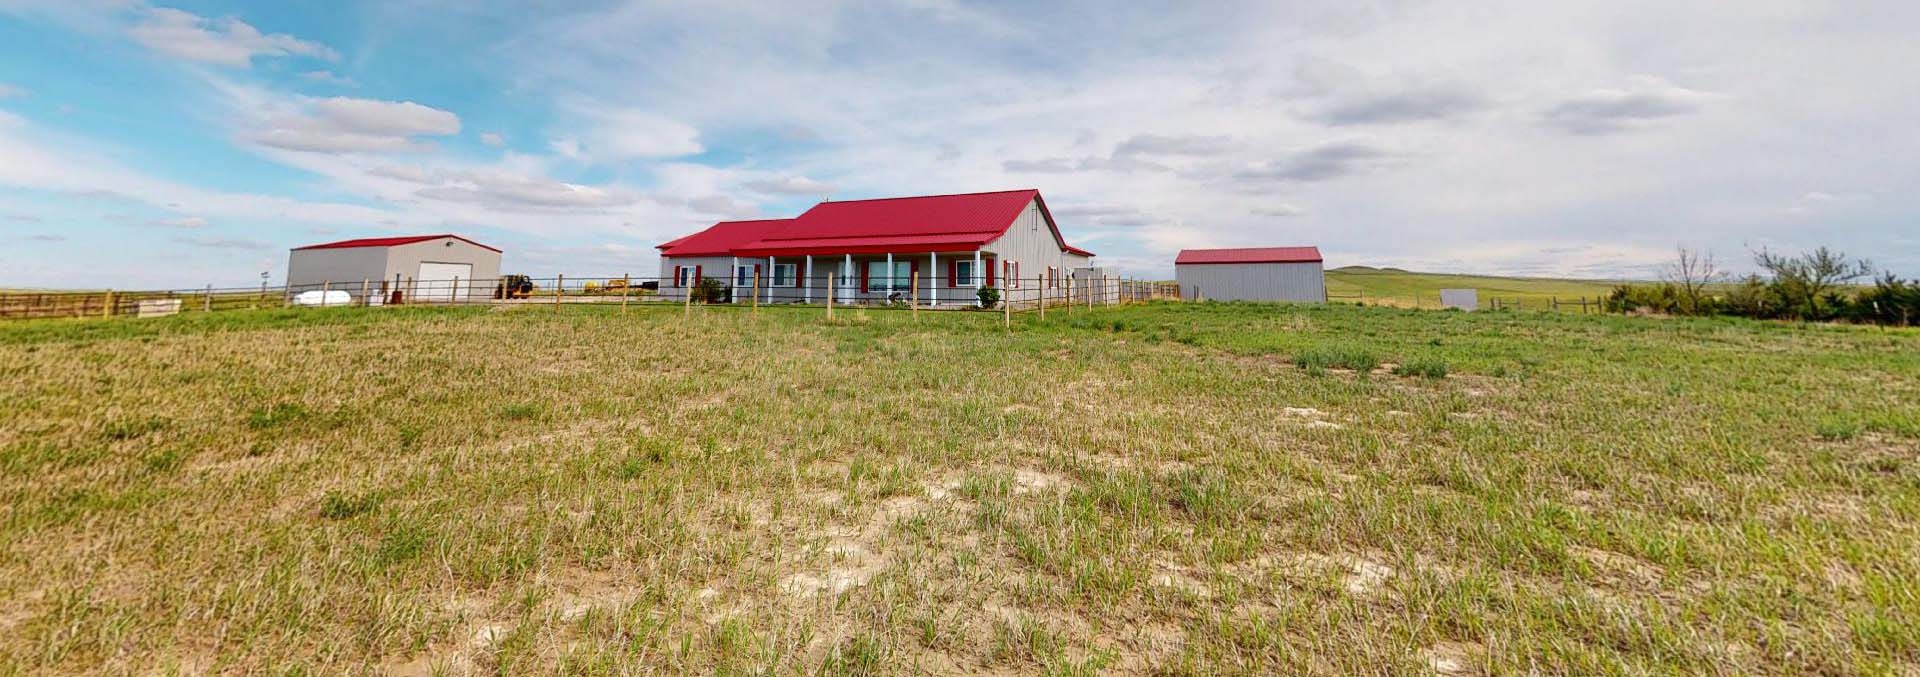 wyoming cattle ranches for sale three buttes ranch